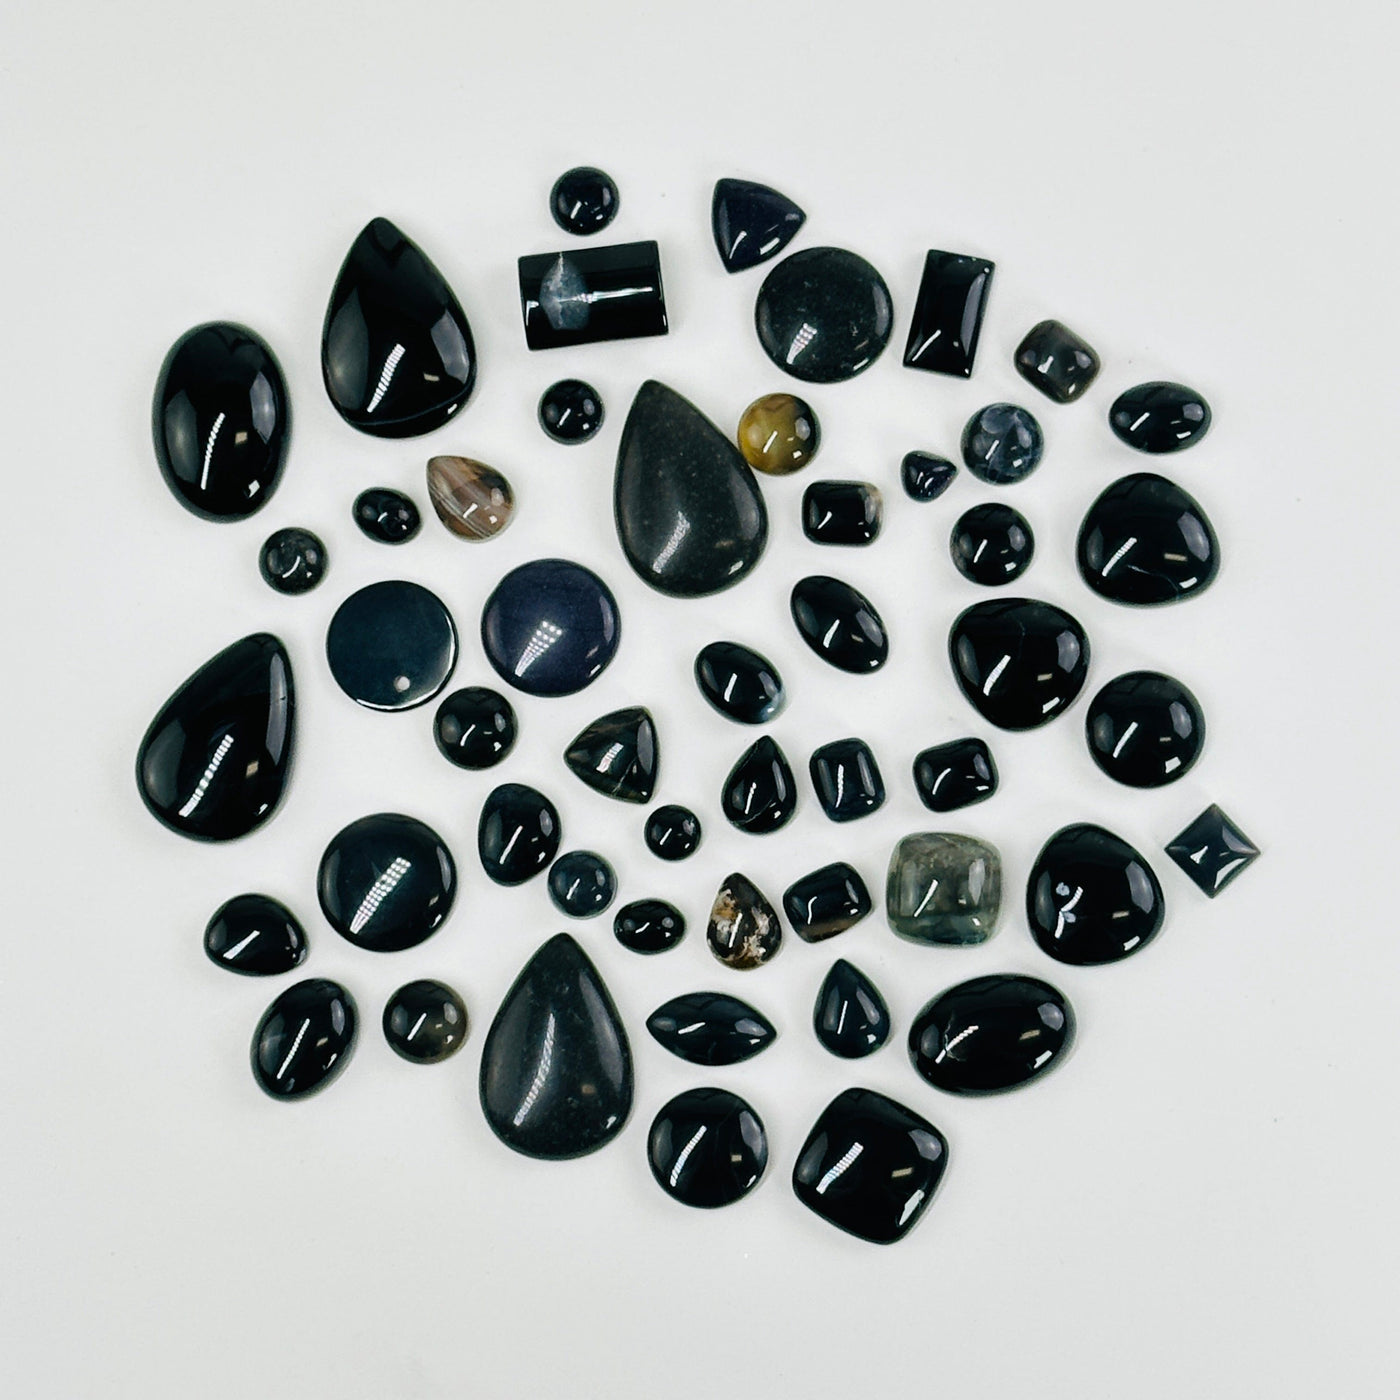 black stone cabochons scattered on white background